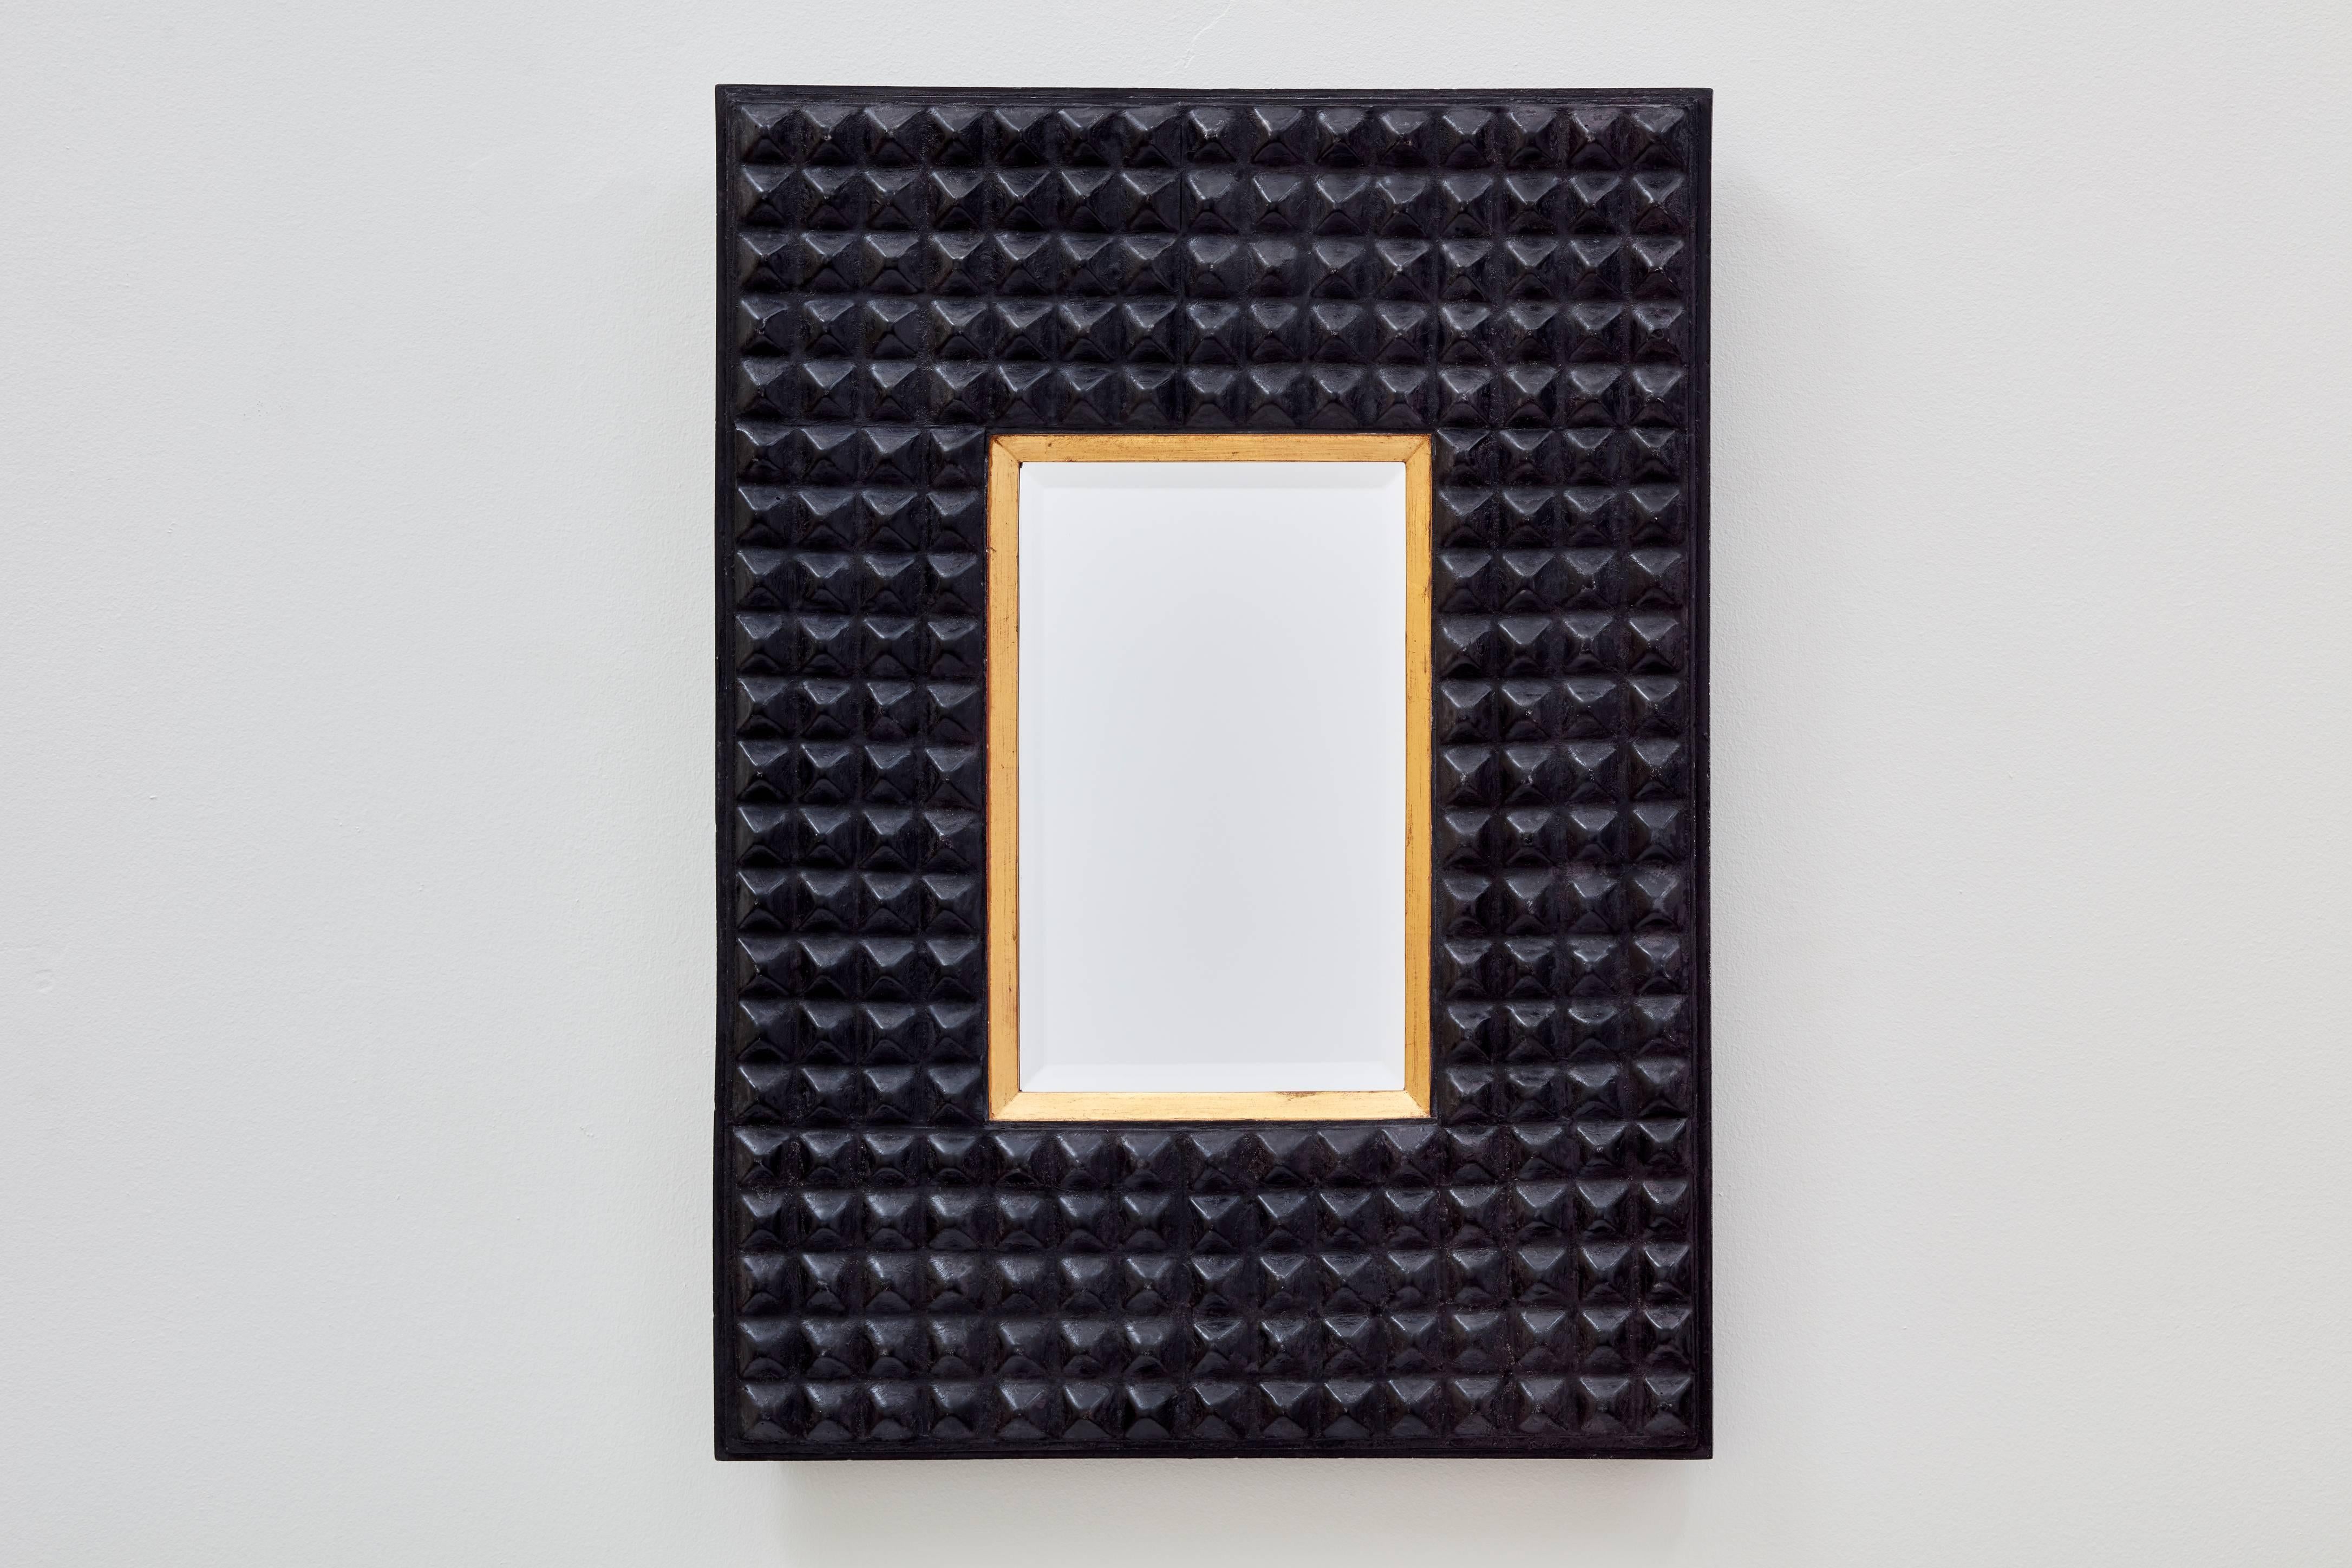 A perfectly imperfect rectangular shape, the studded surface and dark tone of the Ferarra mirror from Bark Frameworks evoke a tribal aesthetic. The mold for this mirror -- designed by Miguel Oks and Jared Bark -- was cast from a pressed tin